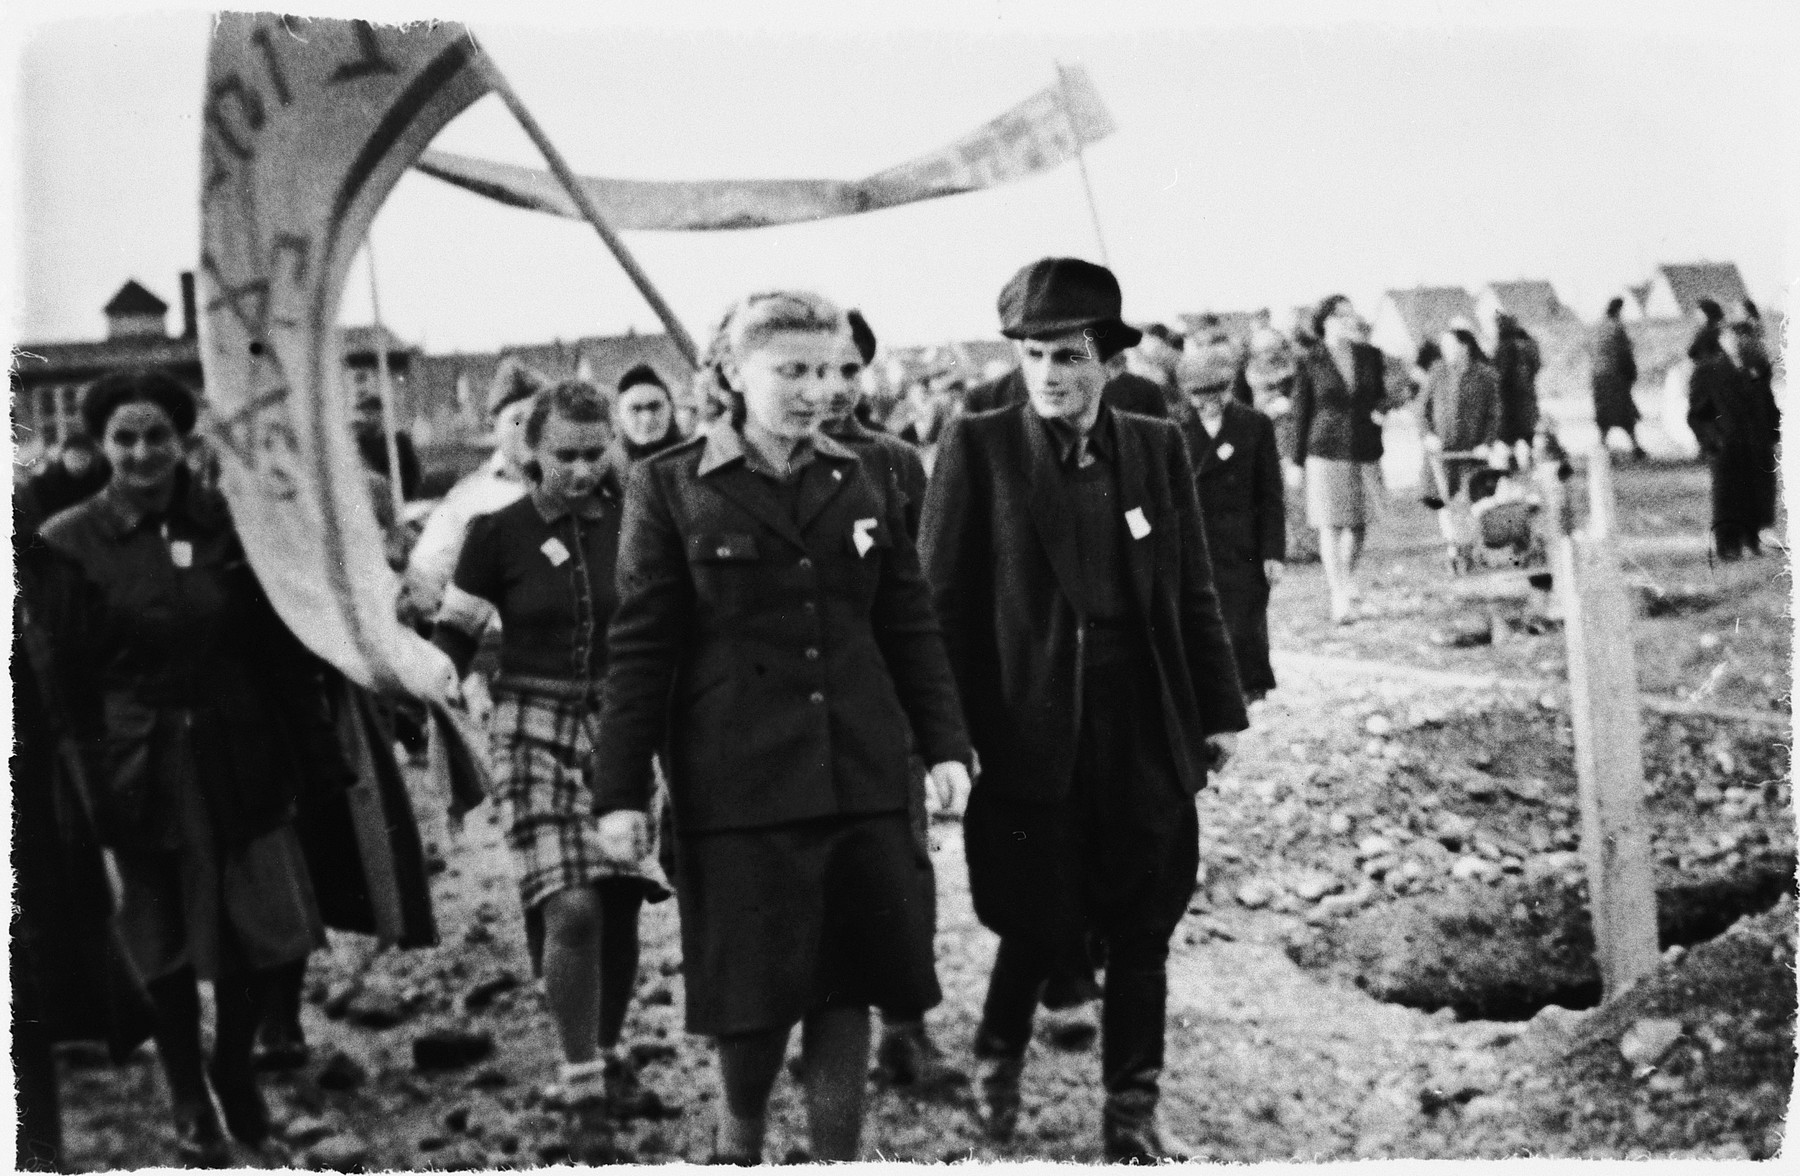 Jewish DPs in the Wels DP camp carrying flags and banner march in a parade to celebrate the partition of Palestine.